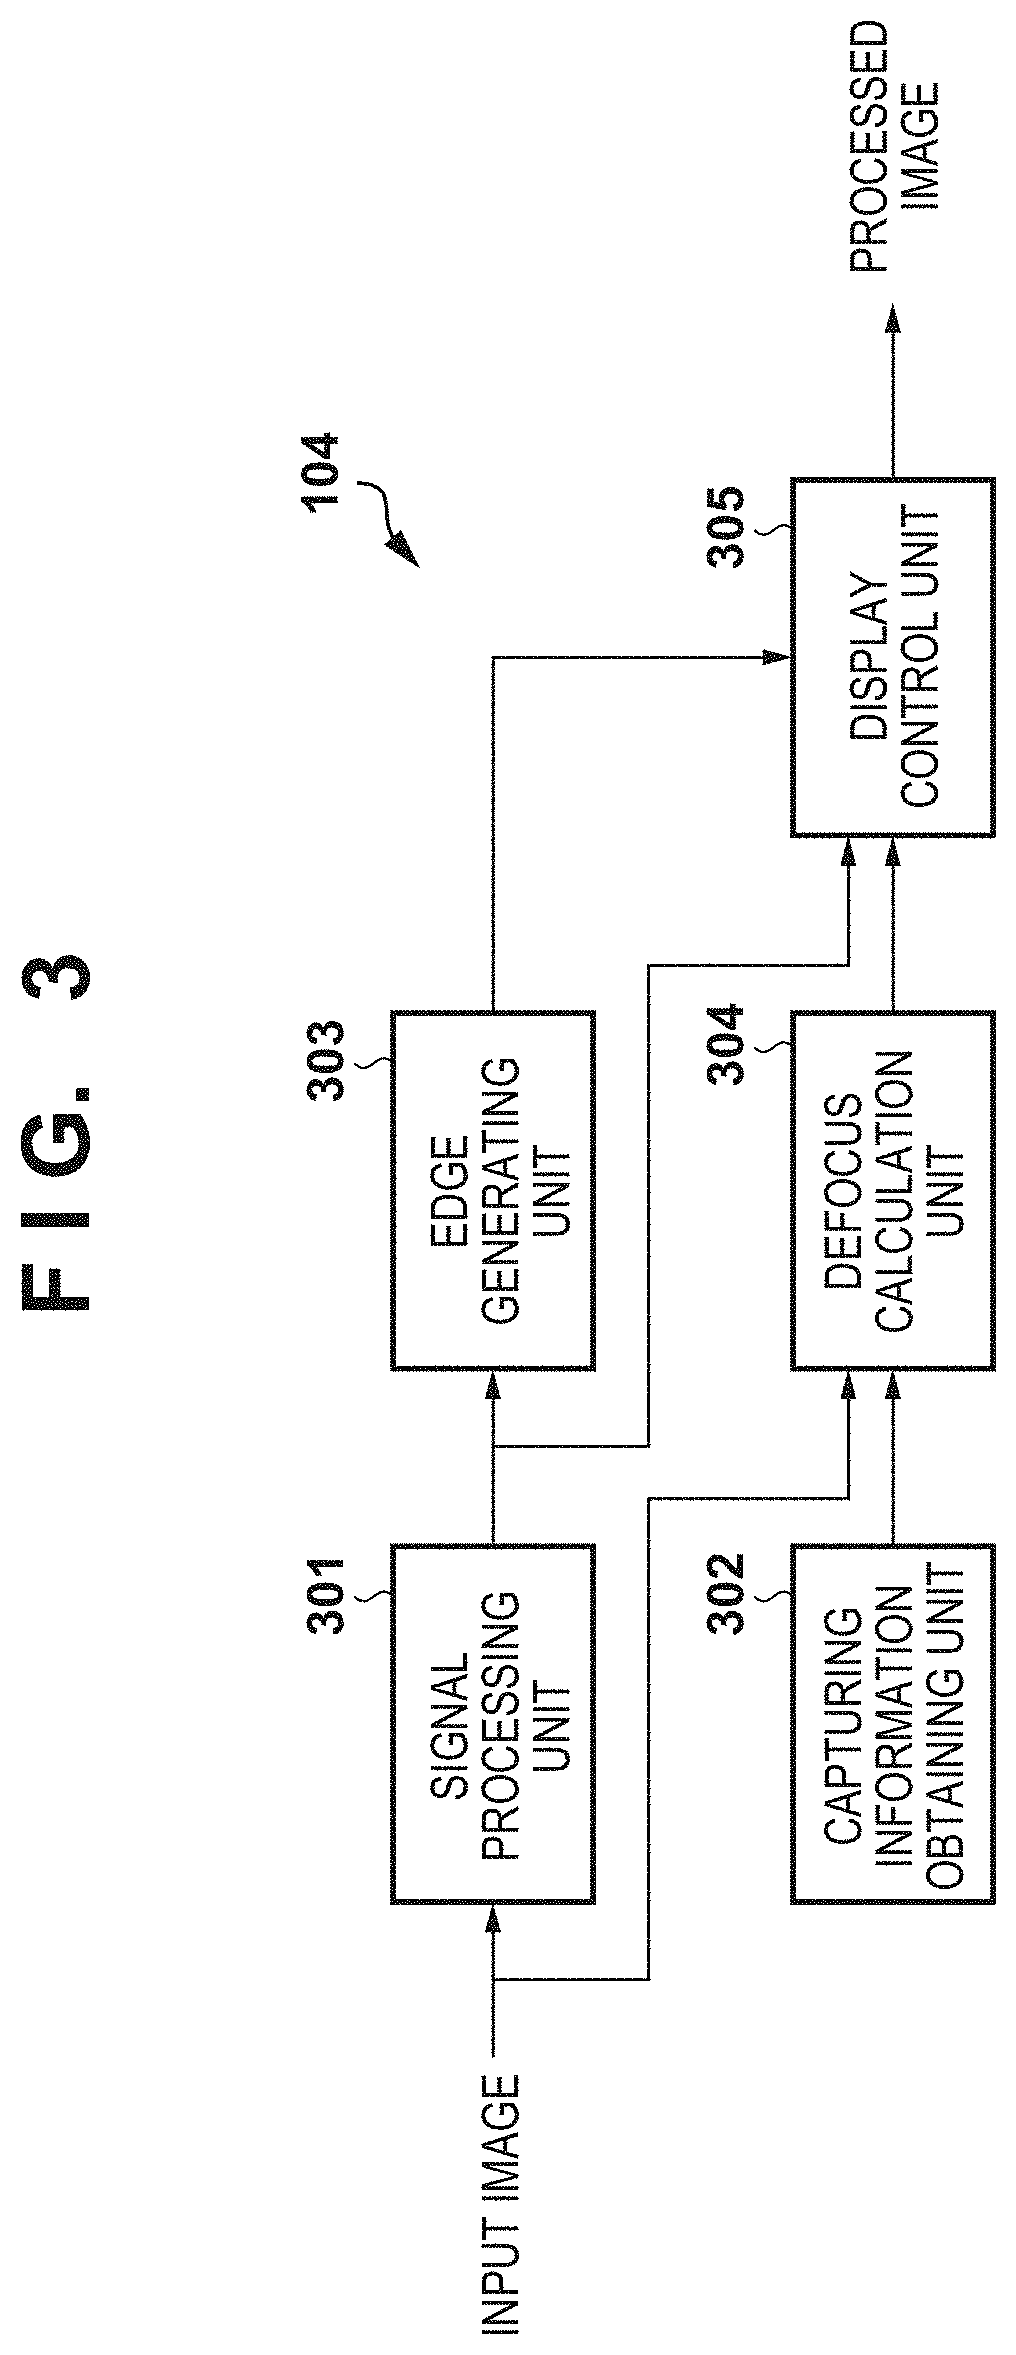 Image processing apparatus for providing information for confirming depth range of image, control method of the same, and storage medium